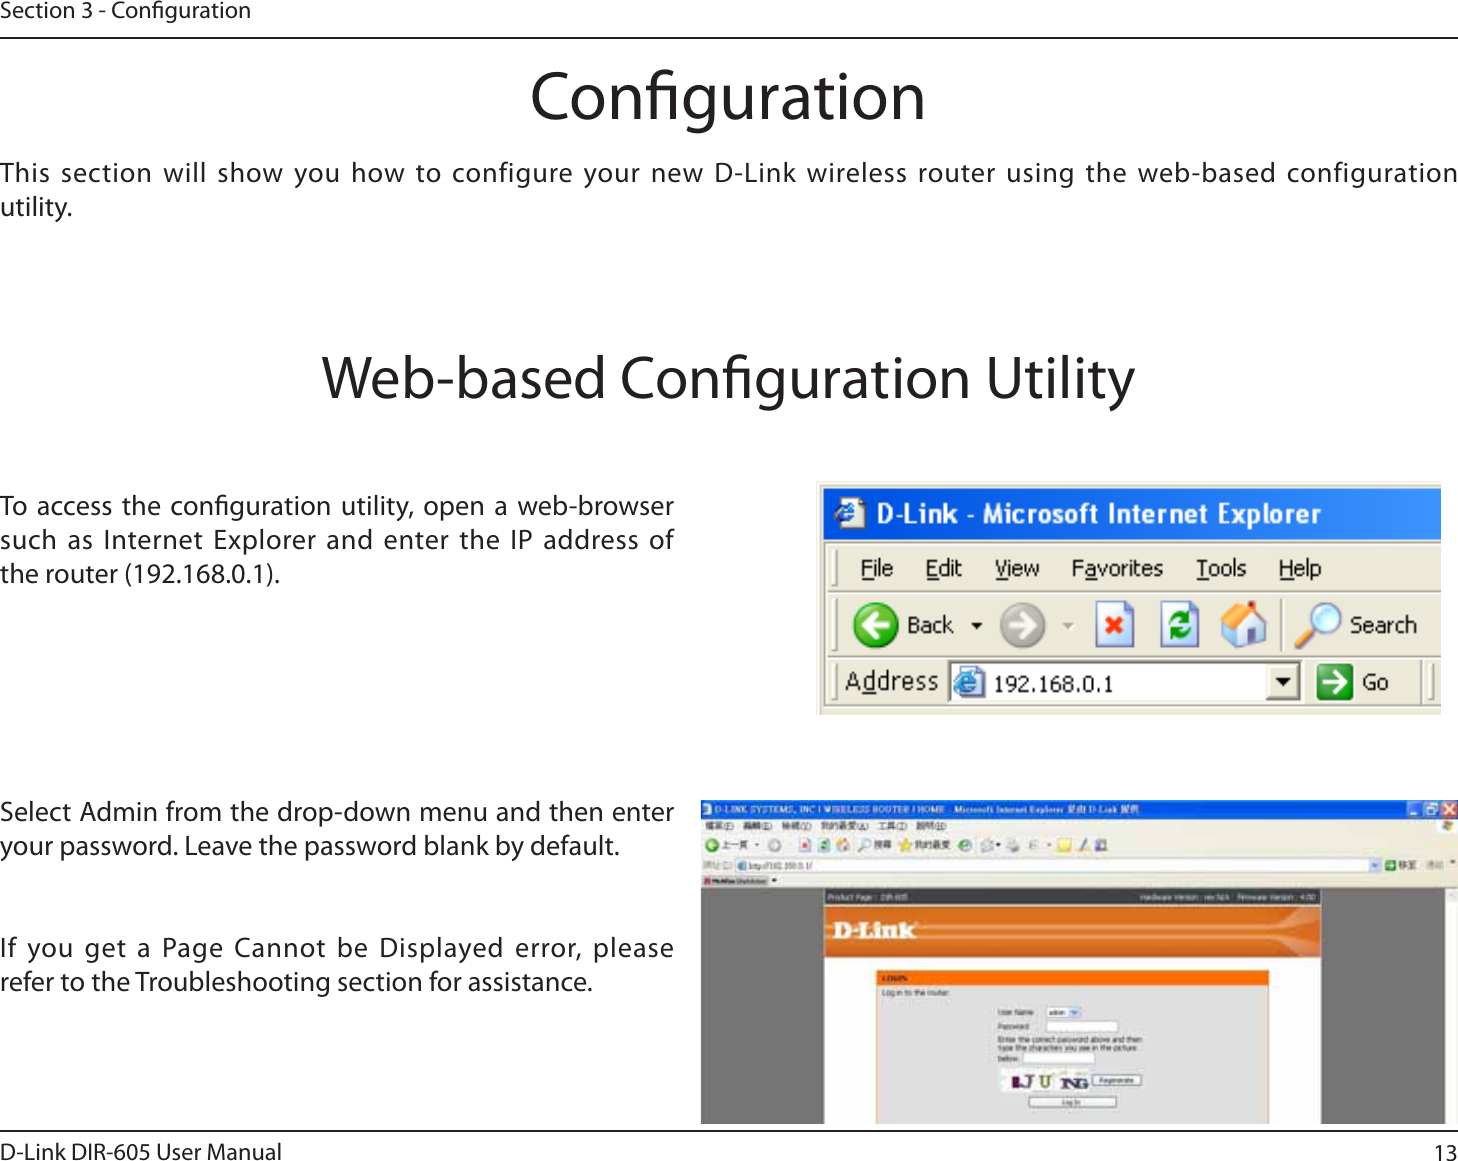 13D-Link DIR-605 User ManualSection 3 - CongurationCongurationThis section will show you how to configure your new D-Link wireless router using the web-based configuration utility.Web-based Conguration UtilityTo access the conguration utility, open a web-browser such as Internet Explorer and enter the IP address of the router (192.168.0.1).Select Admin from the drop-down menu and then enter your password. Leave the password blank by default.If you get a Page Cannot be Displayed error, please refer to the Troubleshooting section for assistance.